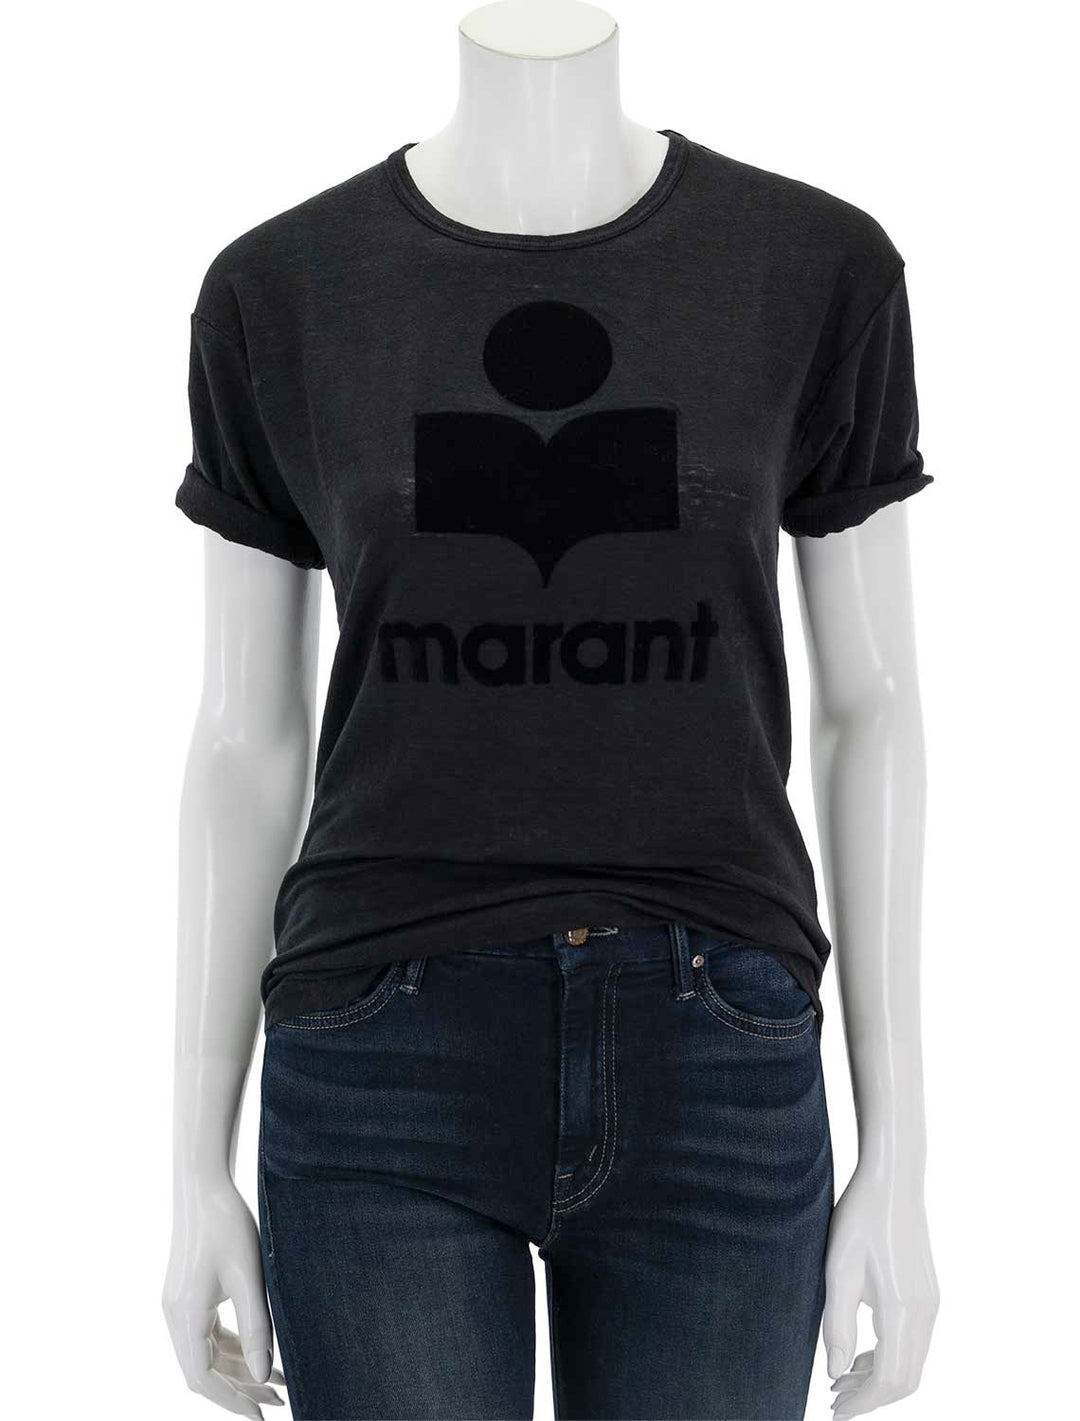 Front view of Isabel Marant Etoile's koldi tee in black.